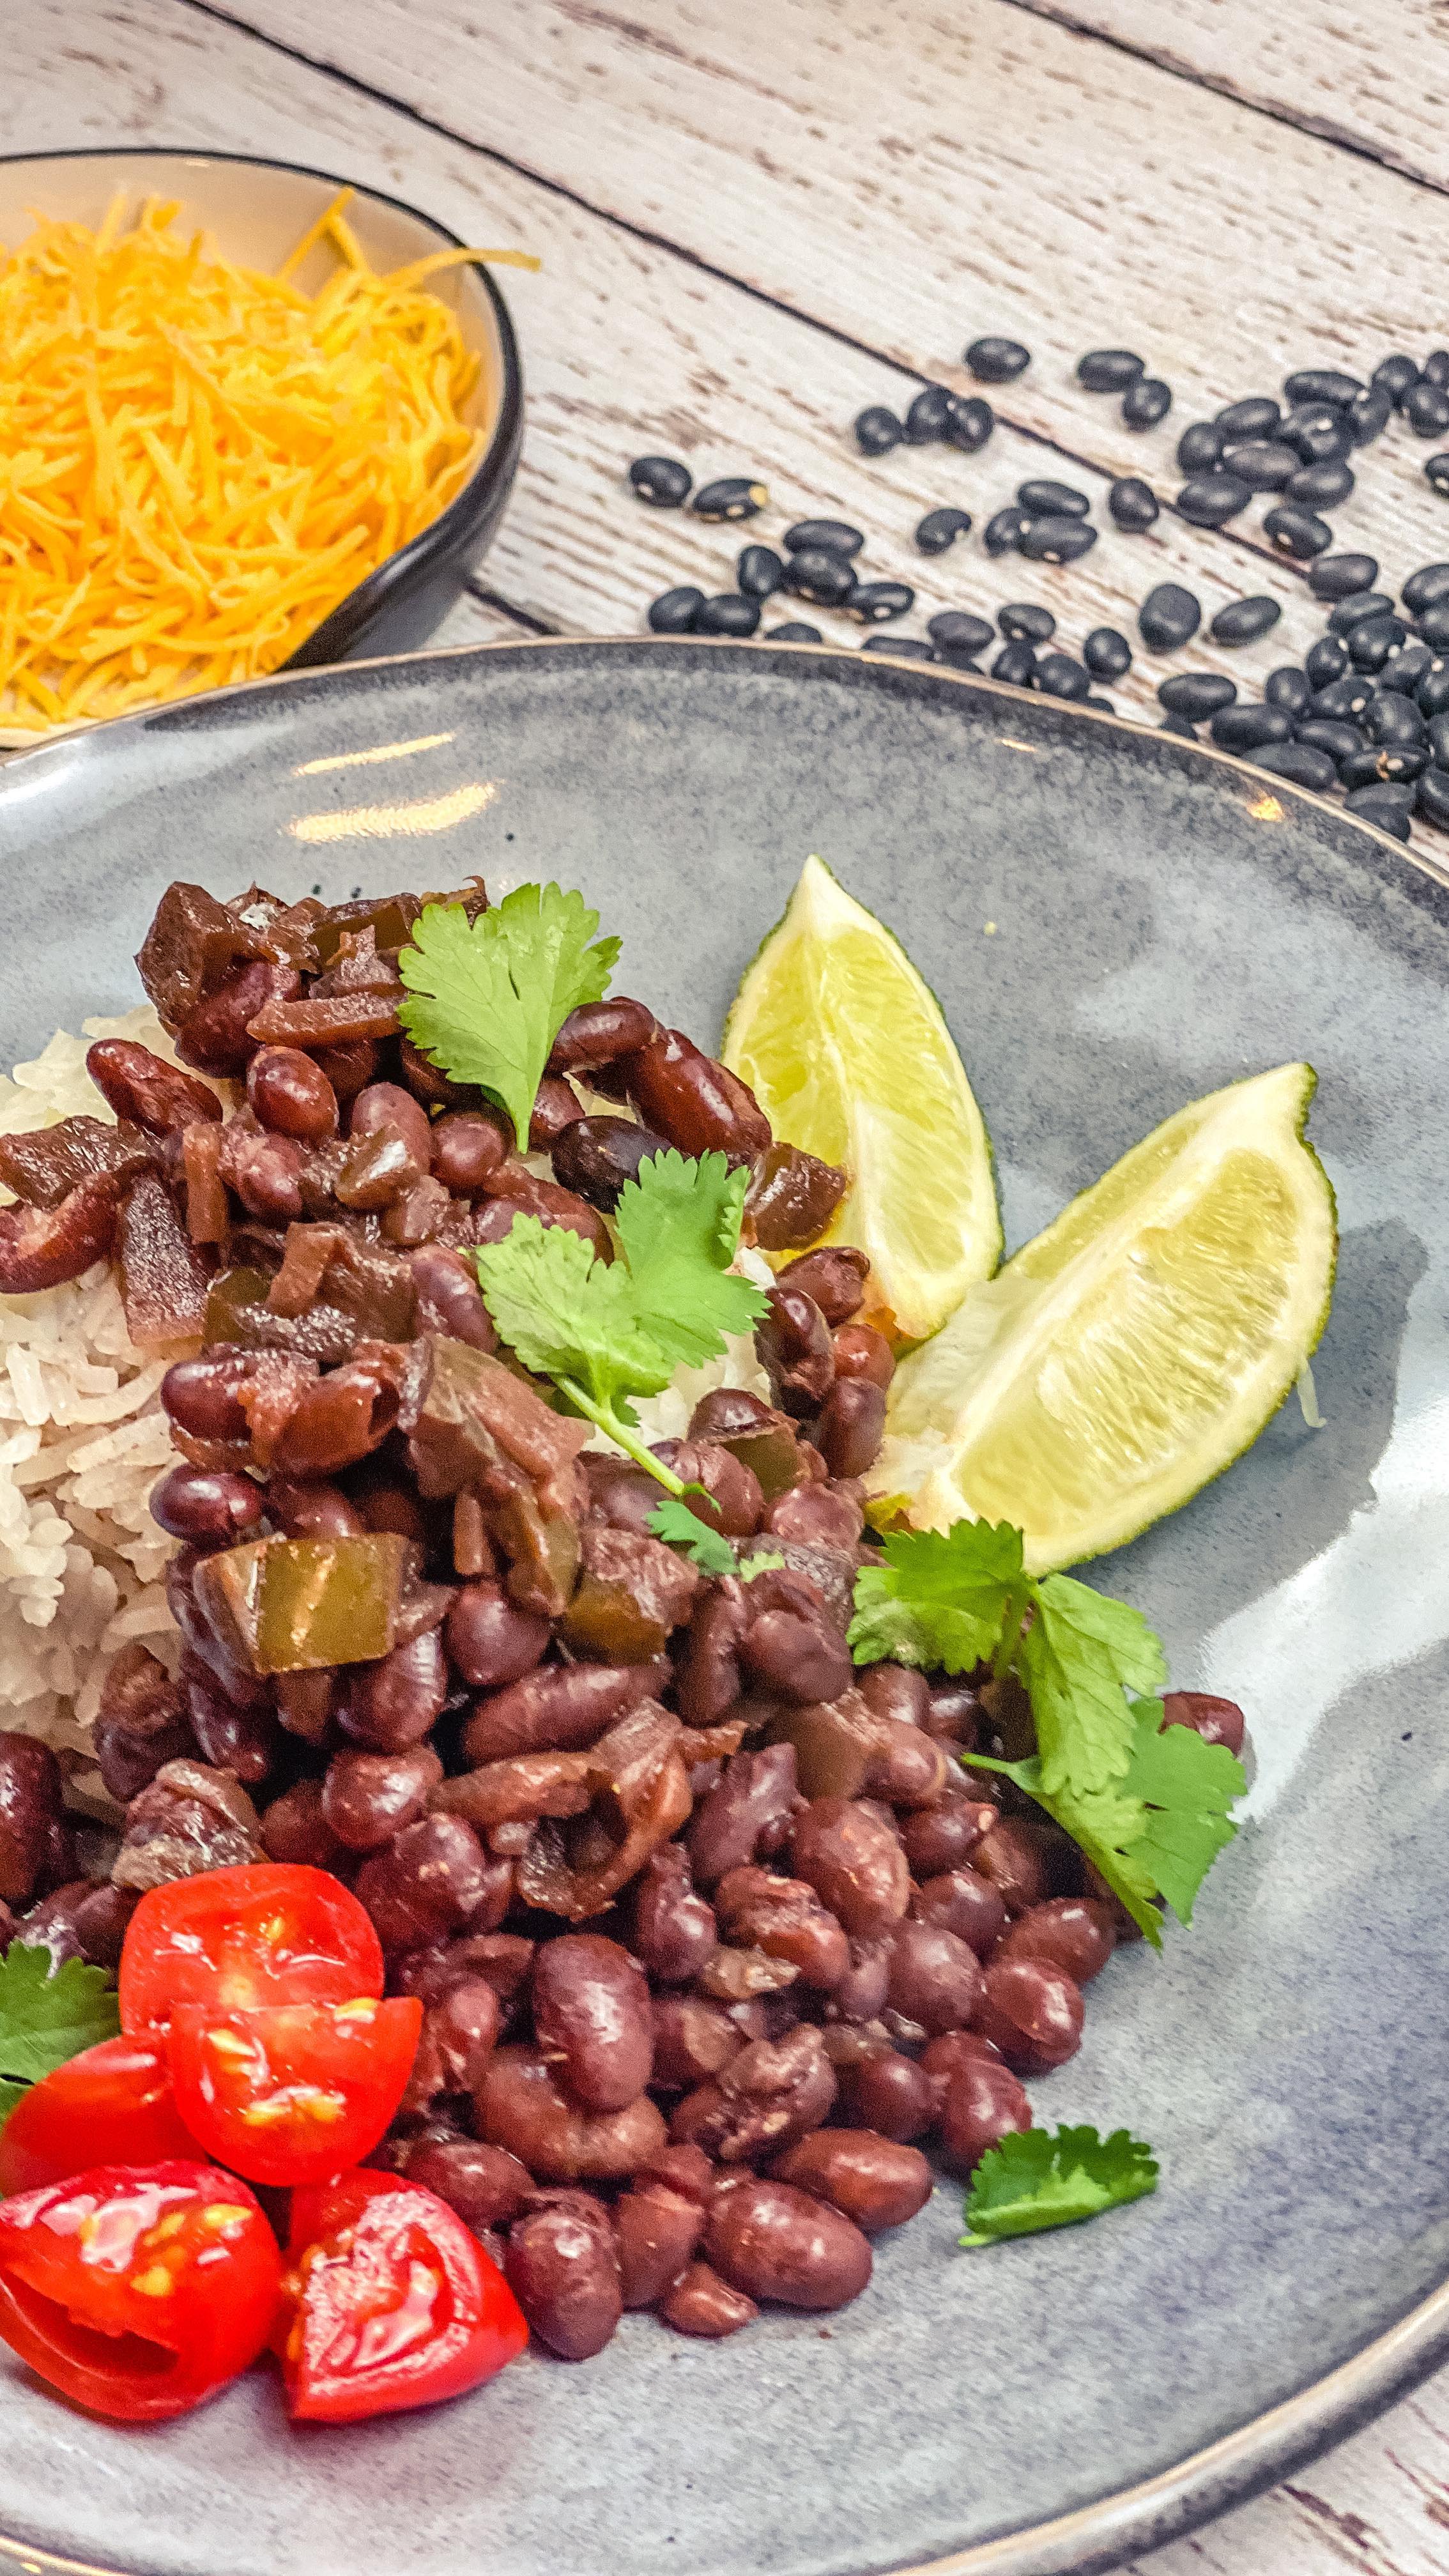 The most “set it and forget it” black bean meal I have ever made. Black beans are loaded with iron, antioxidants, fiber, protein, and good carbohydrates. Get this... This recipe only requires three ingredients and my Instant Pot. Yes, you read that right! 🤩 It's extremely easy and simple. I hope your family and friends love it as much as we do. 🍽🥑

P.S. "Beans, beans the musical fruit.......... 🤣🎶

LINK: https://simplysellskitchen.com/instant-pot-black-beans/

#blackbeans #instantpot #instantpotrecipes #easymeals #familymeals #kidfriendly #kidfriendlyfood #cheapmeal #fastfood #rice #vegetarianfood #homemadefood #foodblogeats #foodblogger #sarasotafoodie #floridafoodie #salsa #salsatime #pressurecooker #pressurecooking #onepotrecipe #onepotmeal #setitandforgetit #beansbeansbeans #homemadewithlove #spanishfood #whiterice